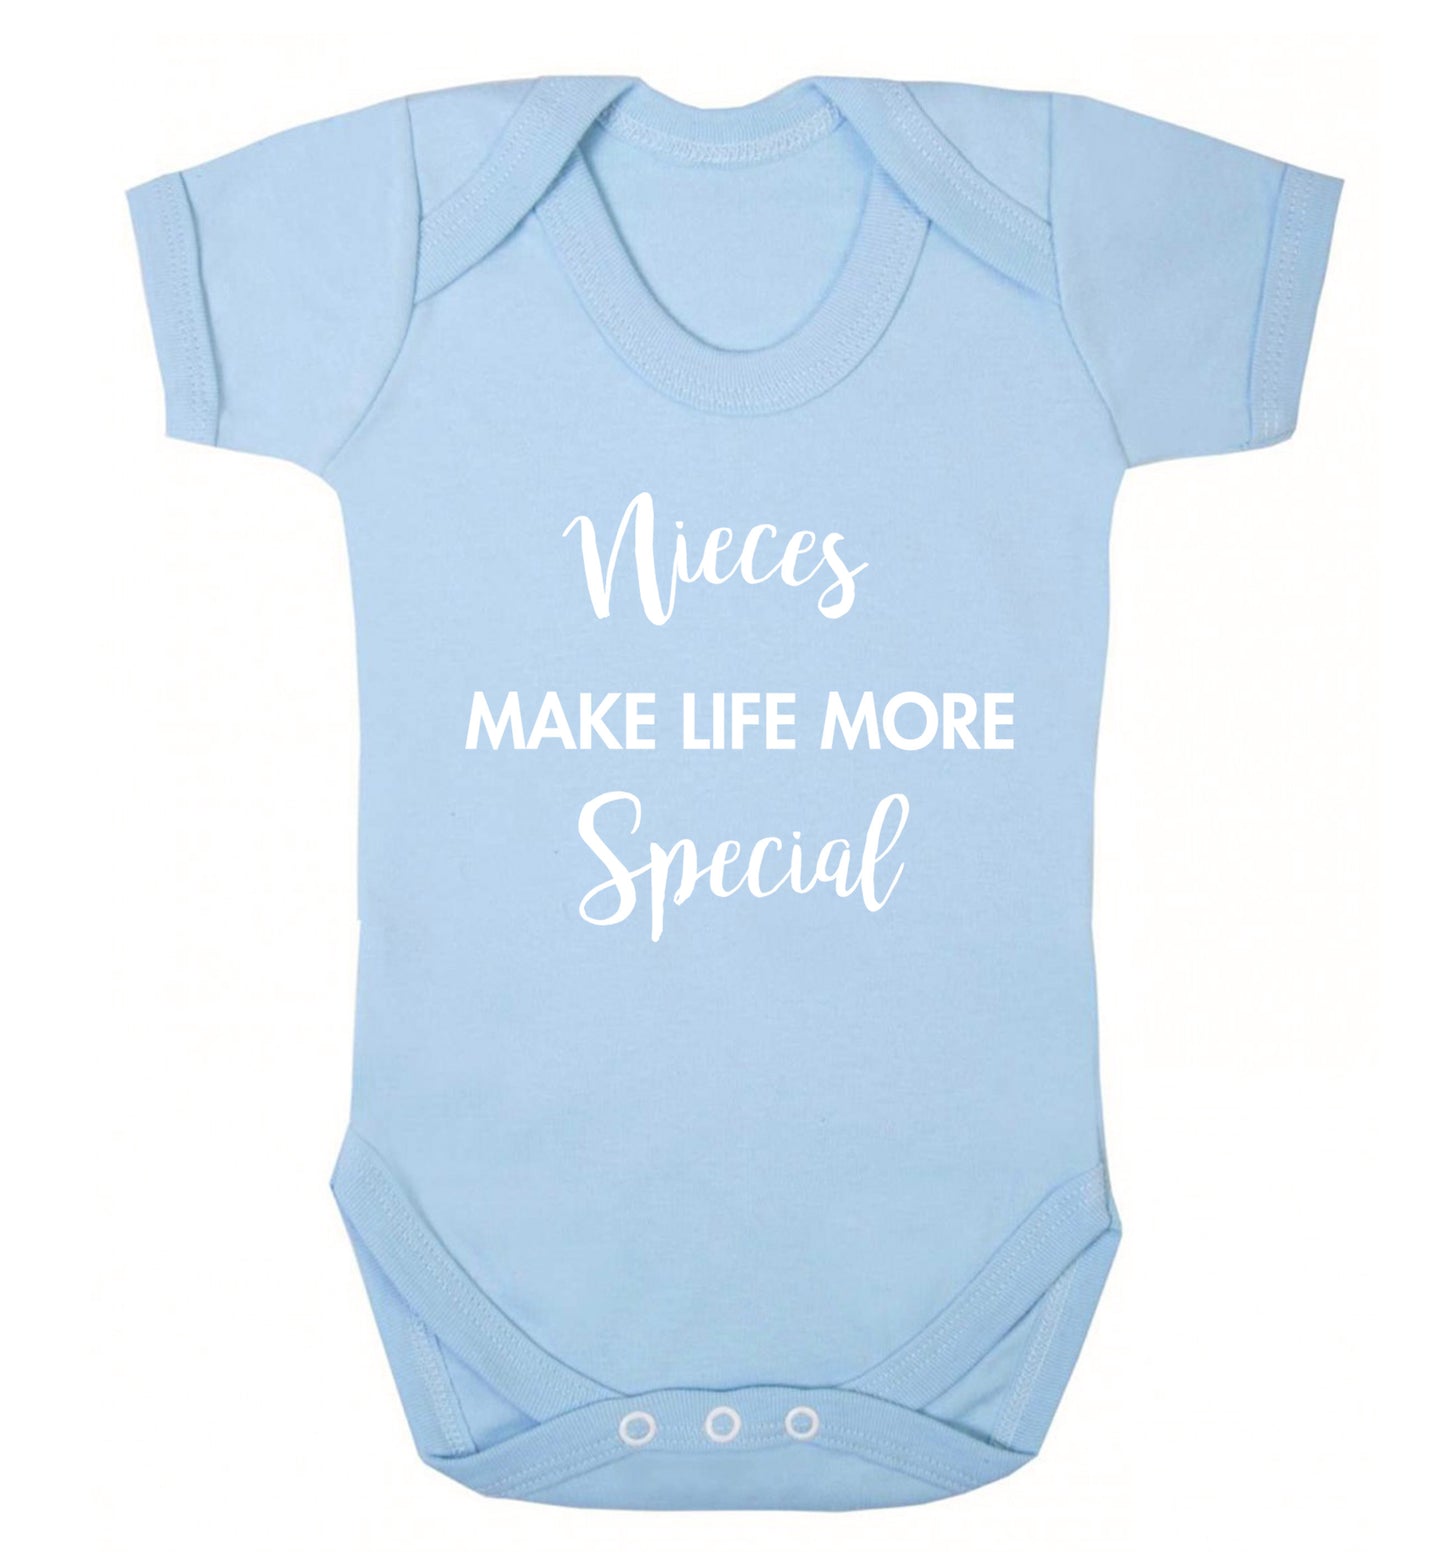 Nieces make life more special Baby Vest pale blue 18-24 months